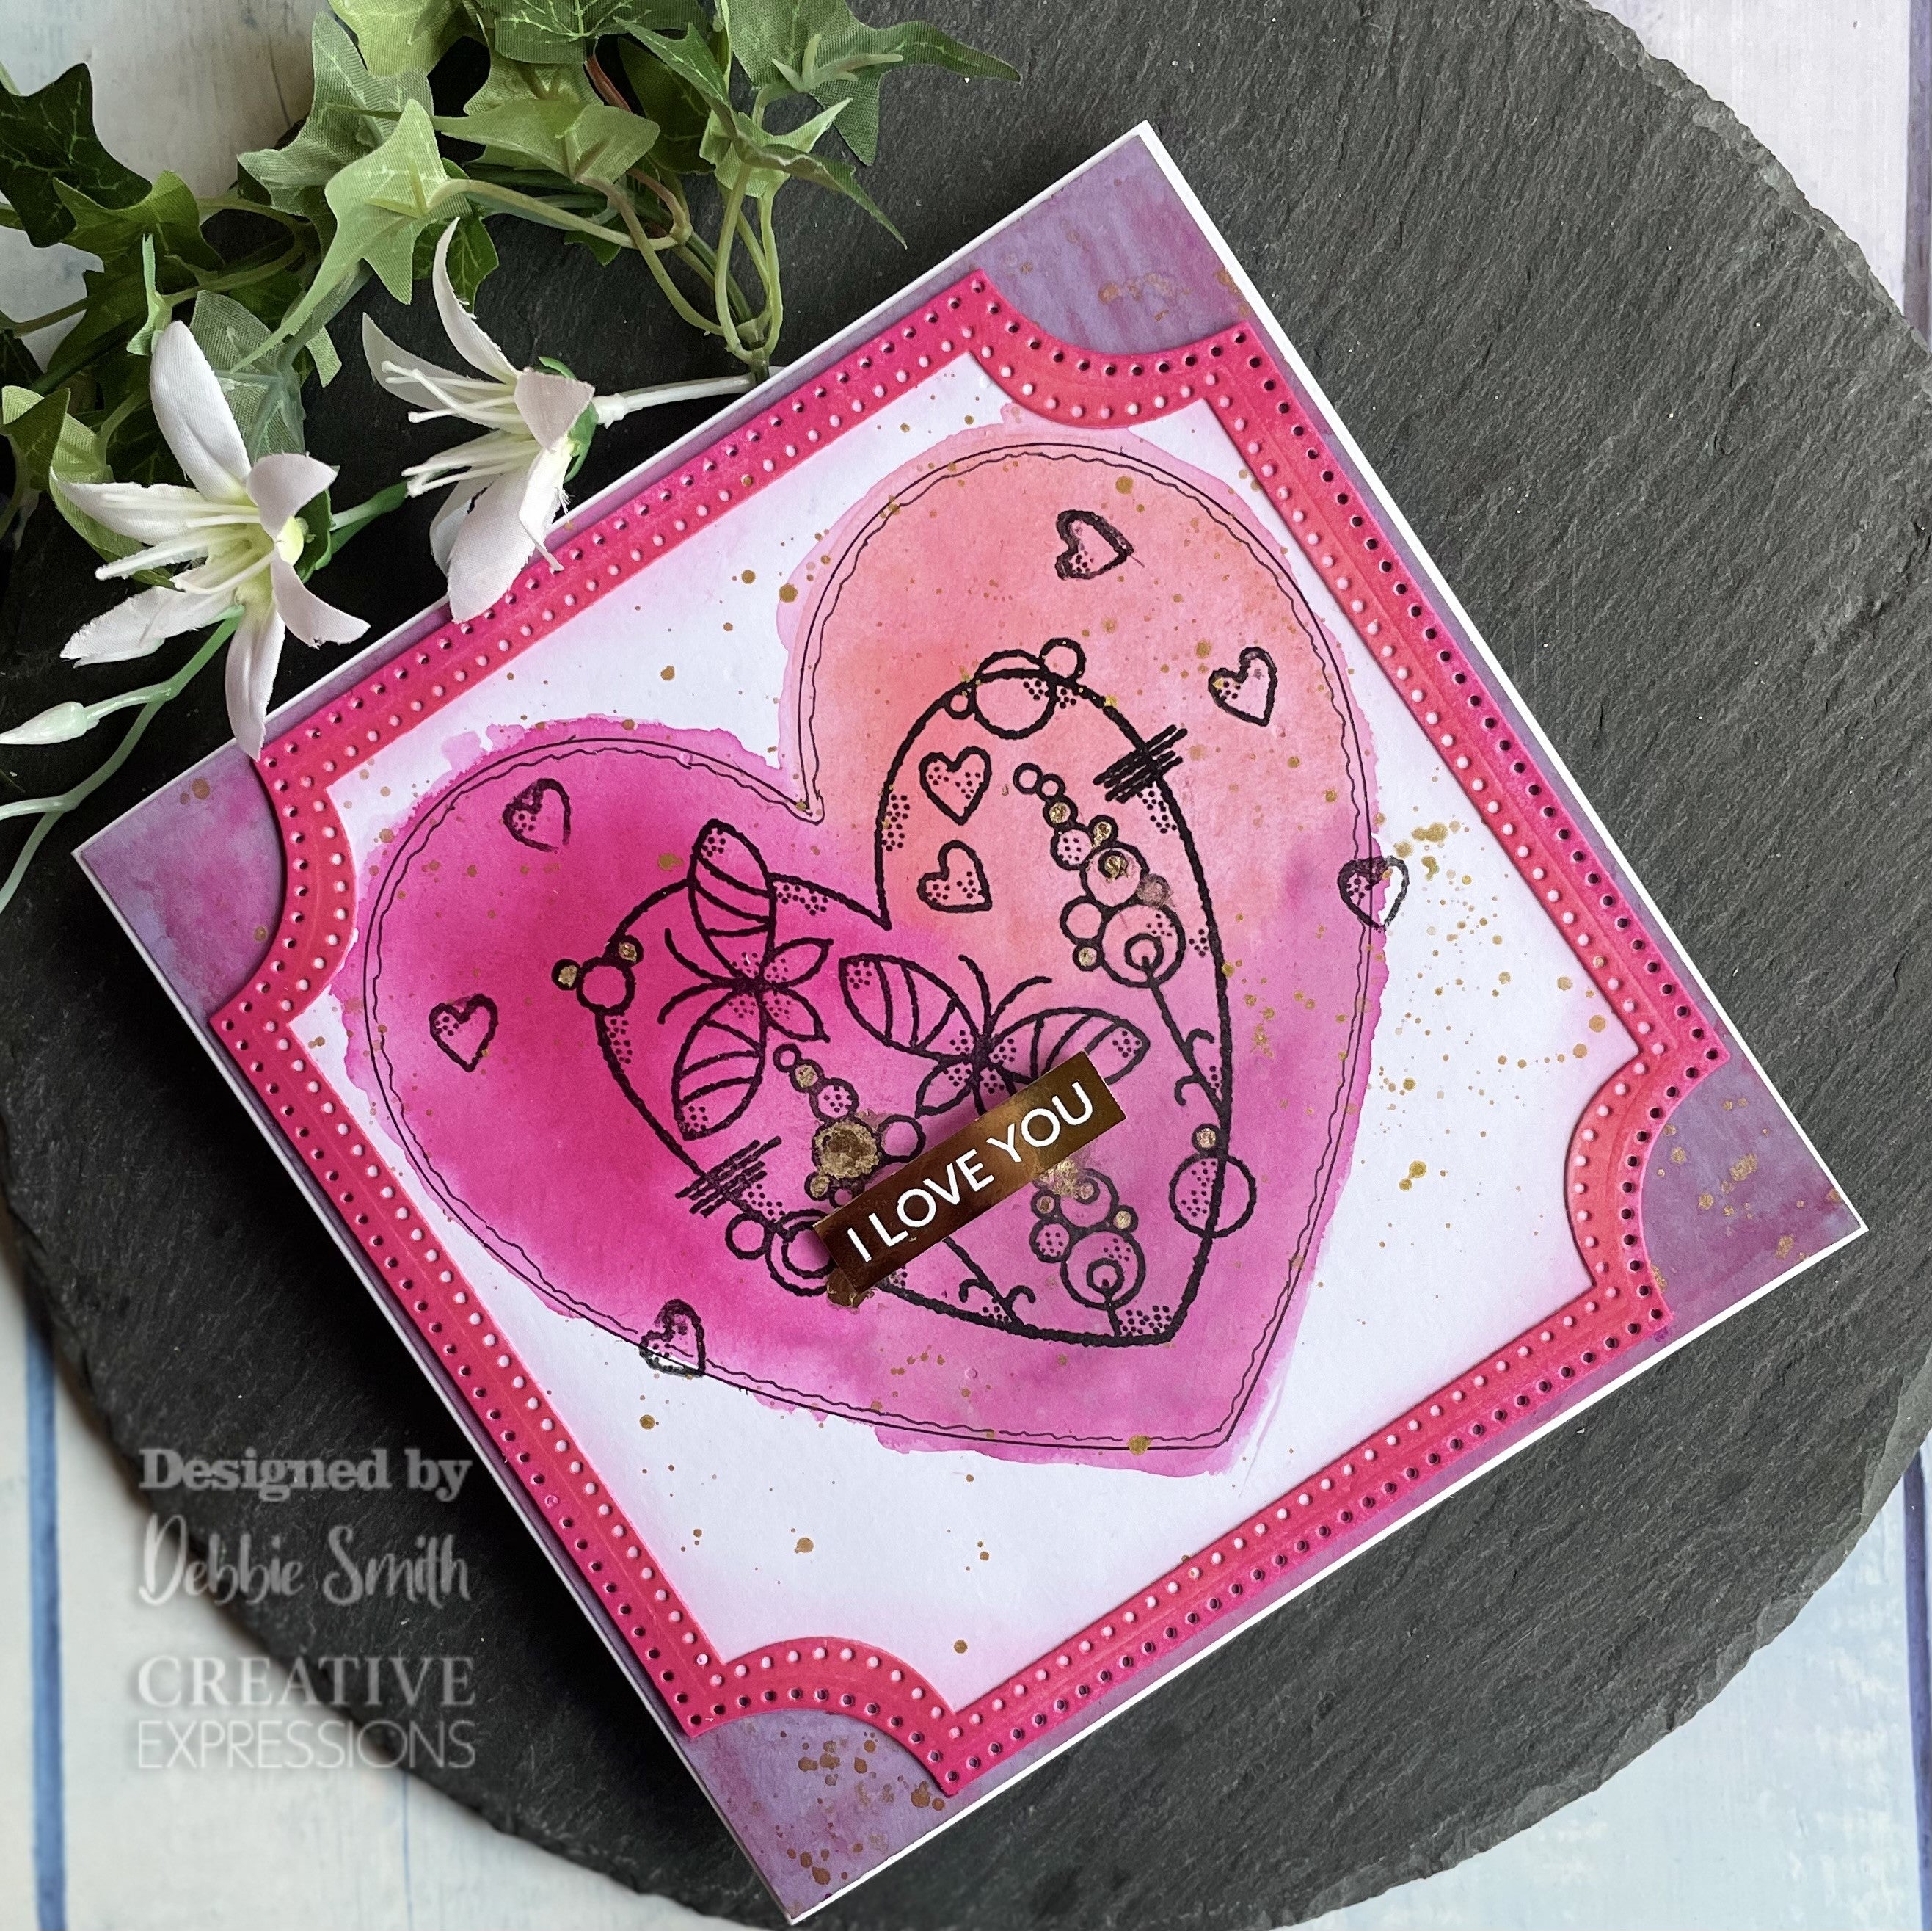 Woodware Clear Singles Butterfly Heart 4 in x 6 in Stamp